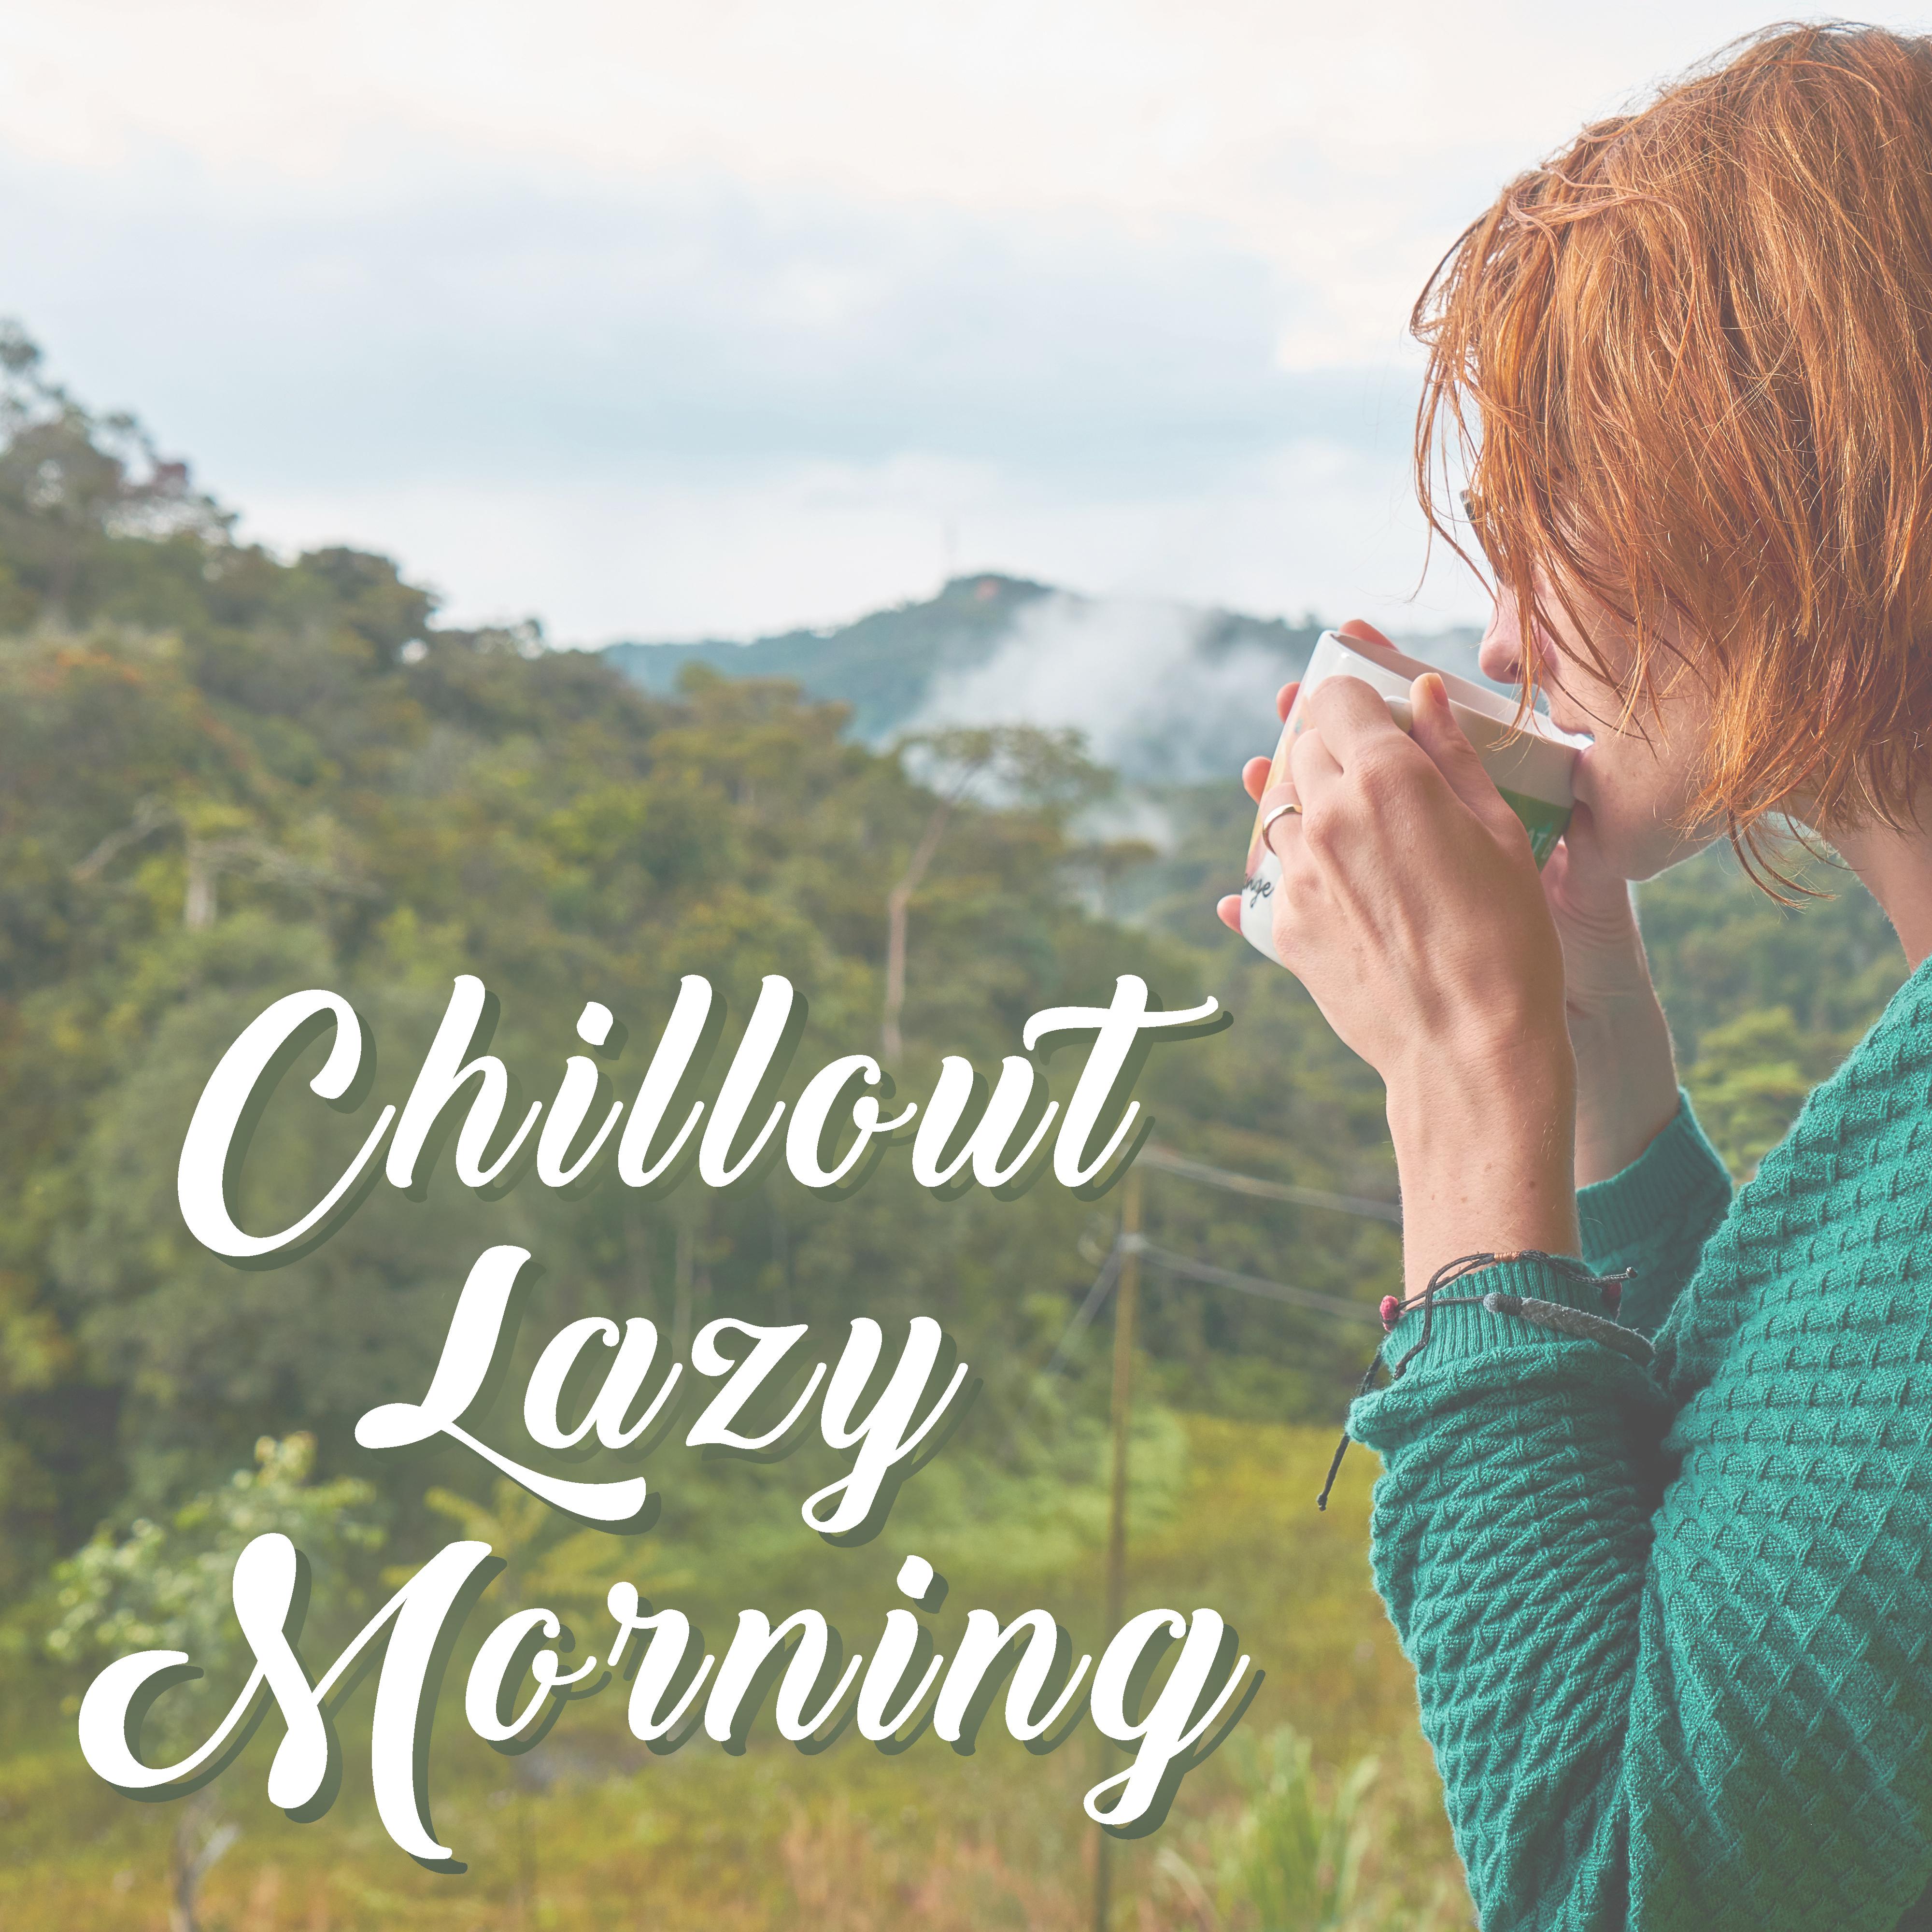 Chillout Lazy Morning  Chillout After Sleep, Relaxed Morning Music, Positive Vibes, Cafe Lounge